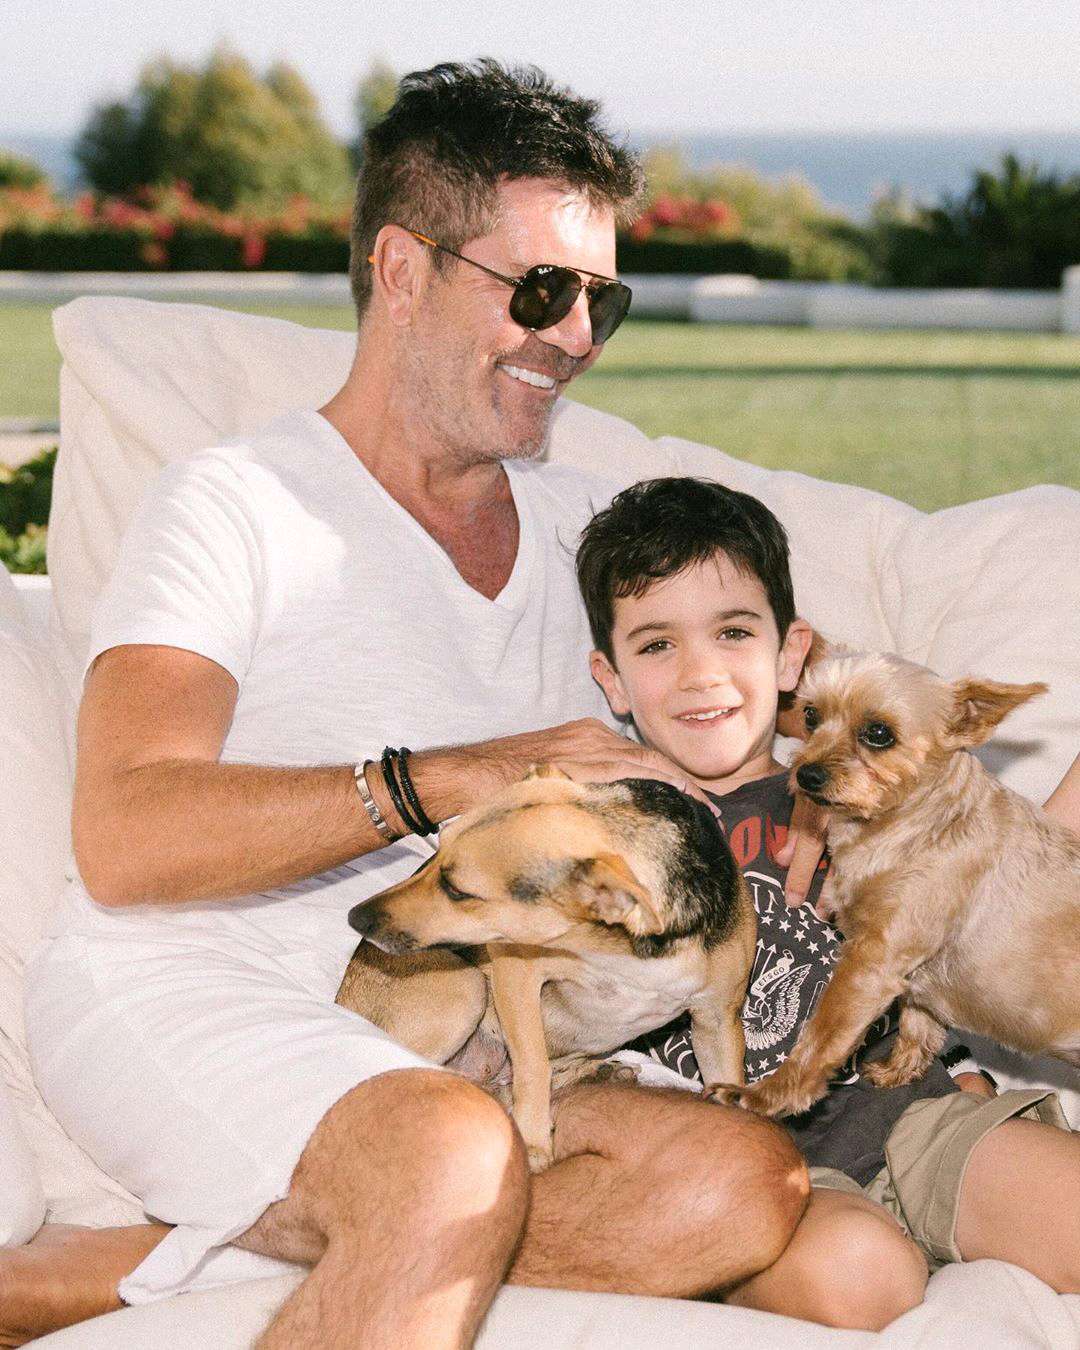 America's Got Talent Judge Simon Cowell Involved In A Bike Accident Risking Paralysis